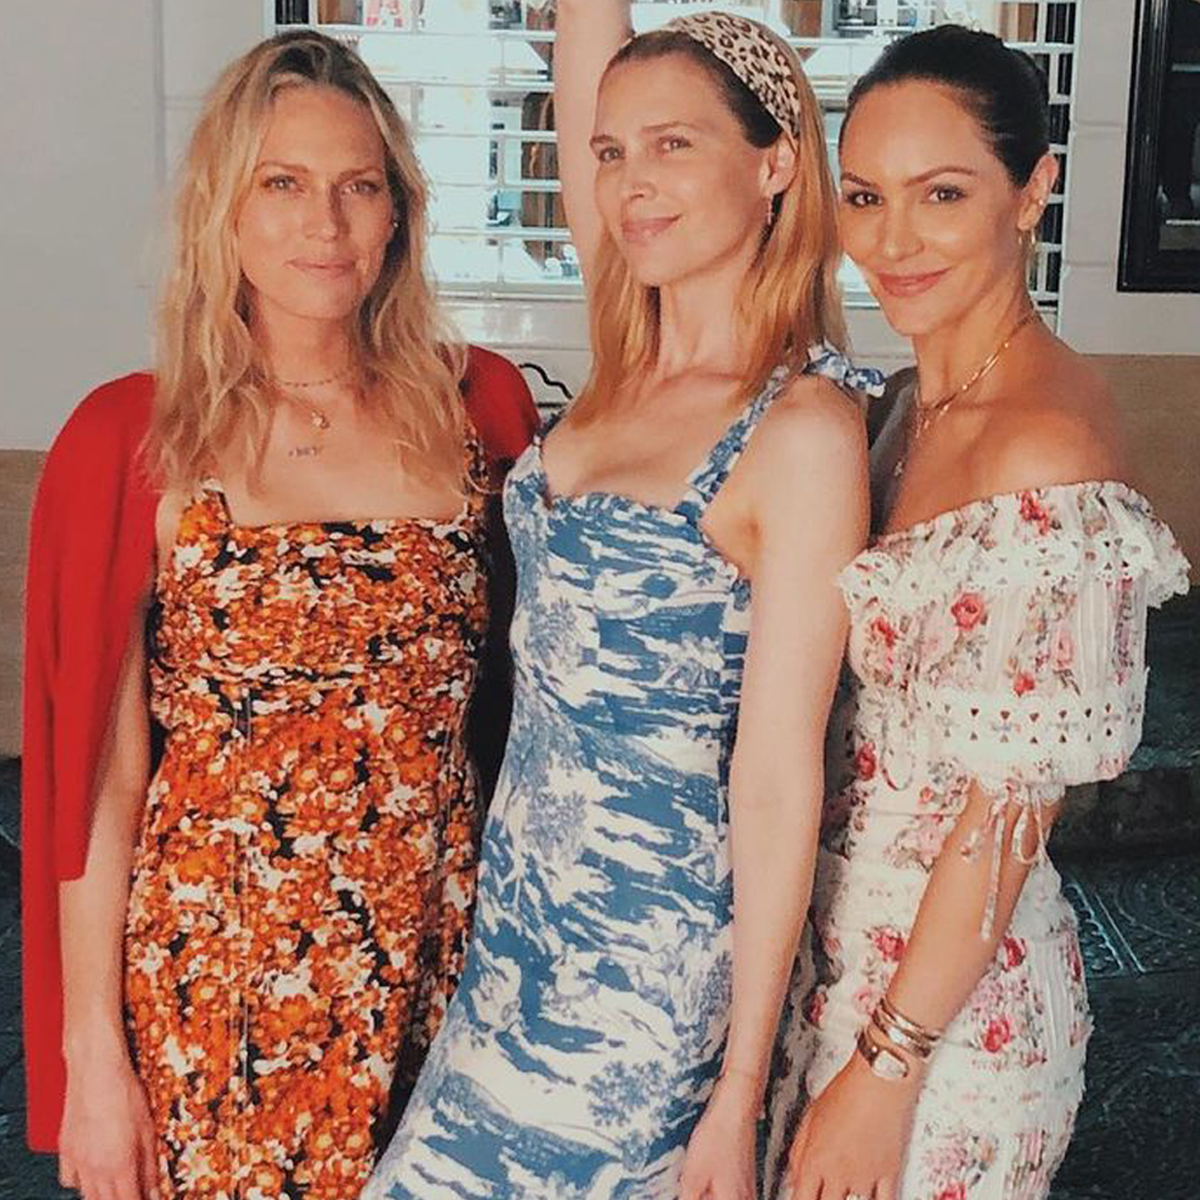 Sara Foster Partners With Summersalt for Family Swimwear Collection